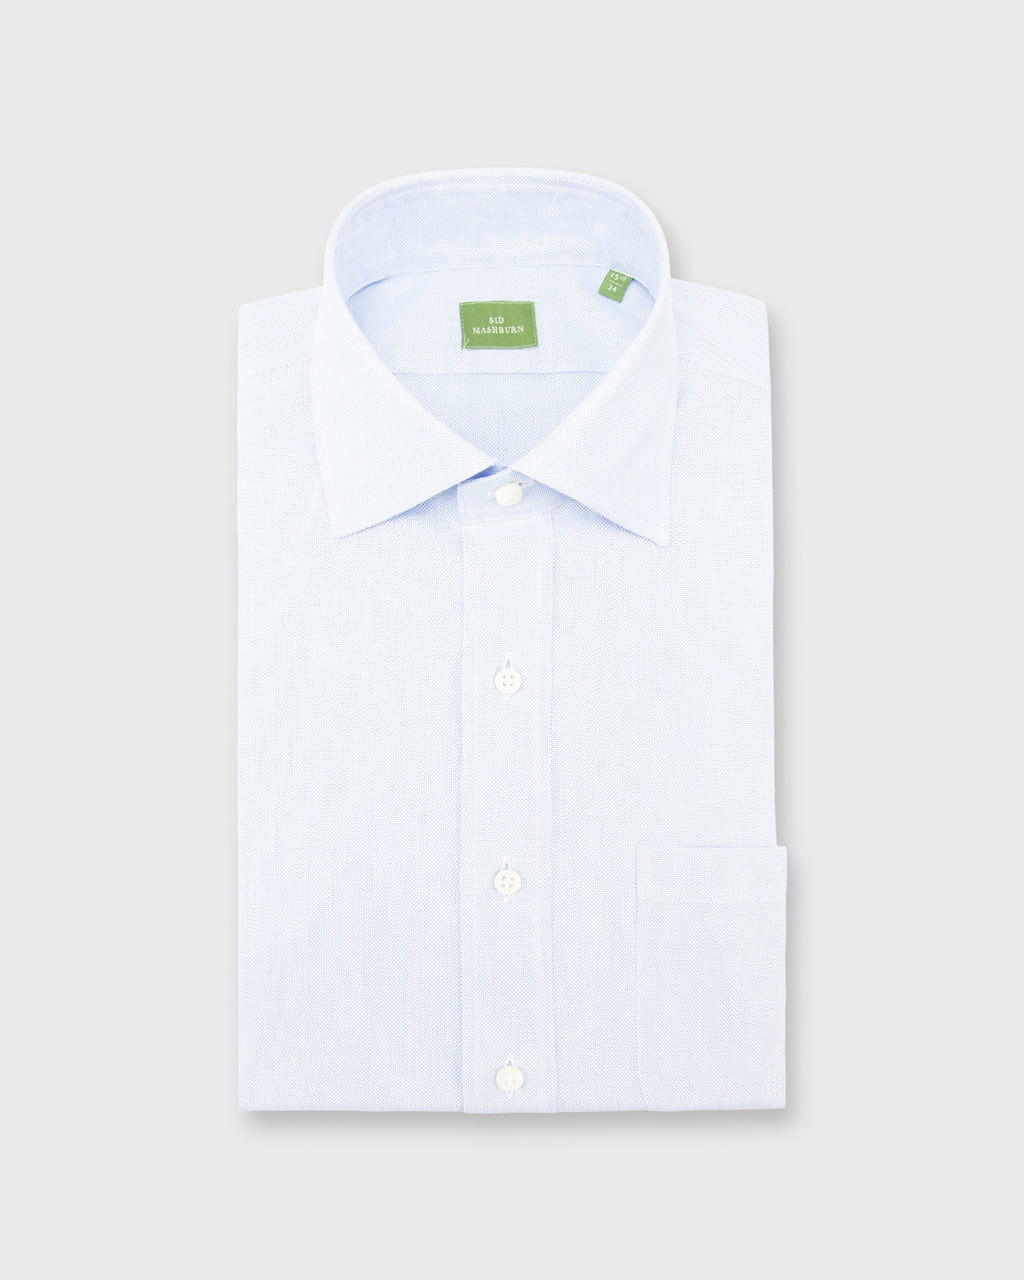 Spread Collar Dress Shirt Pale Blue Micro Cellulare